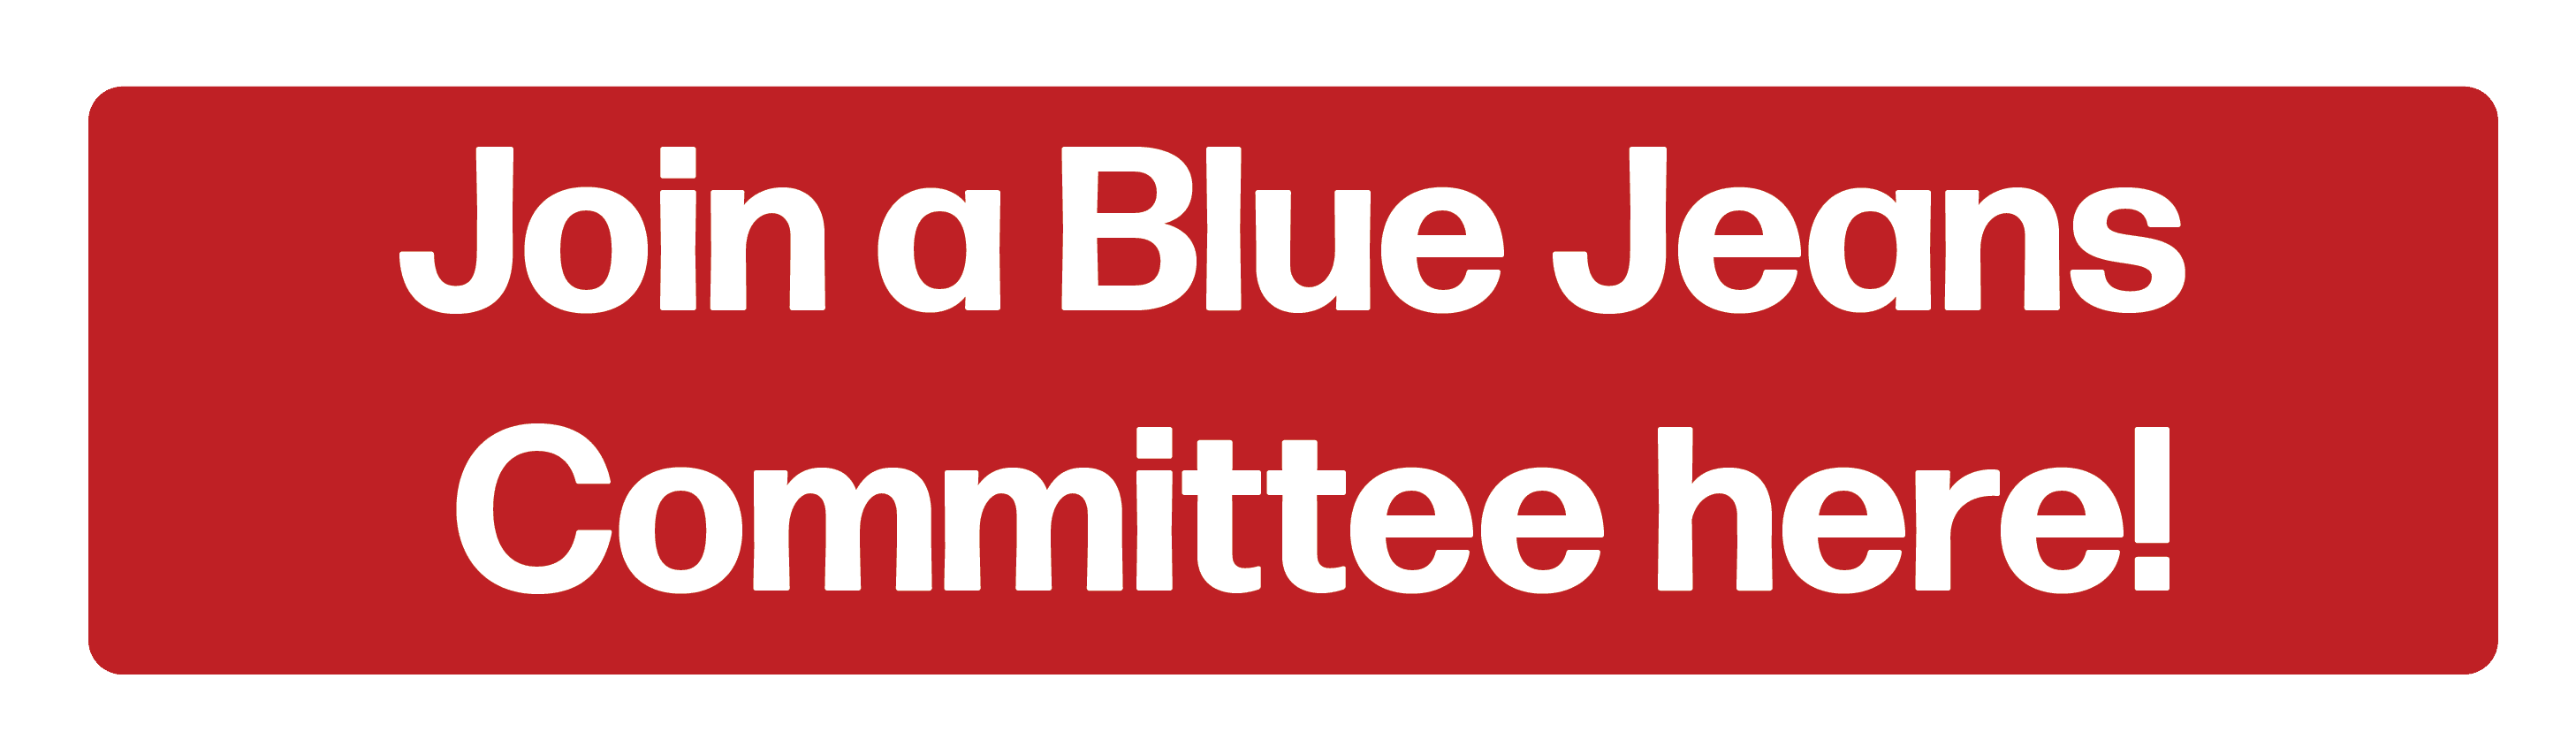 Join a Blue Jeans Committee!